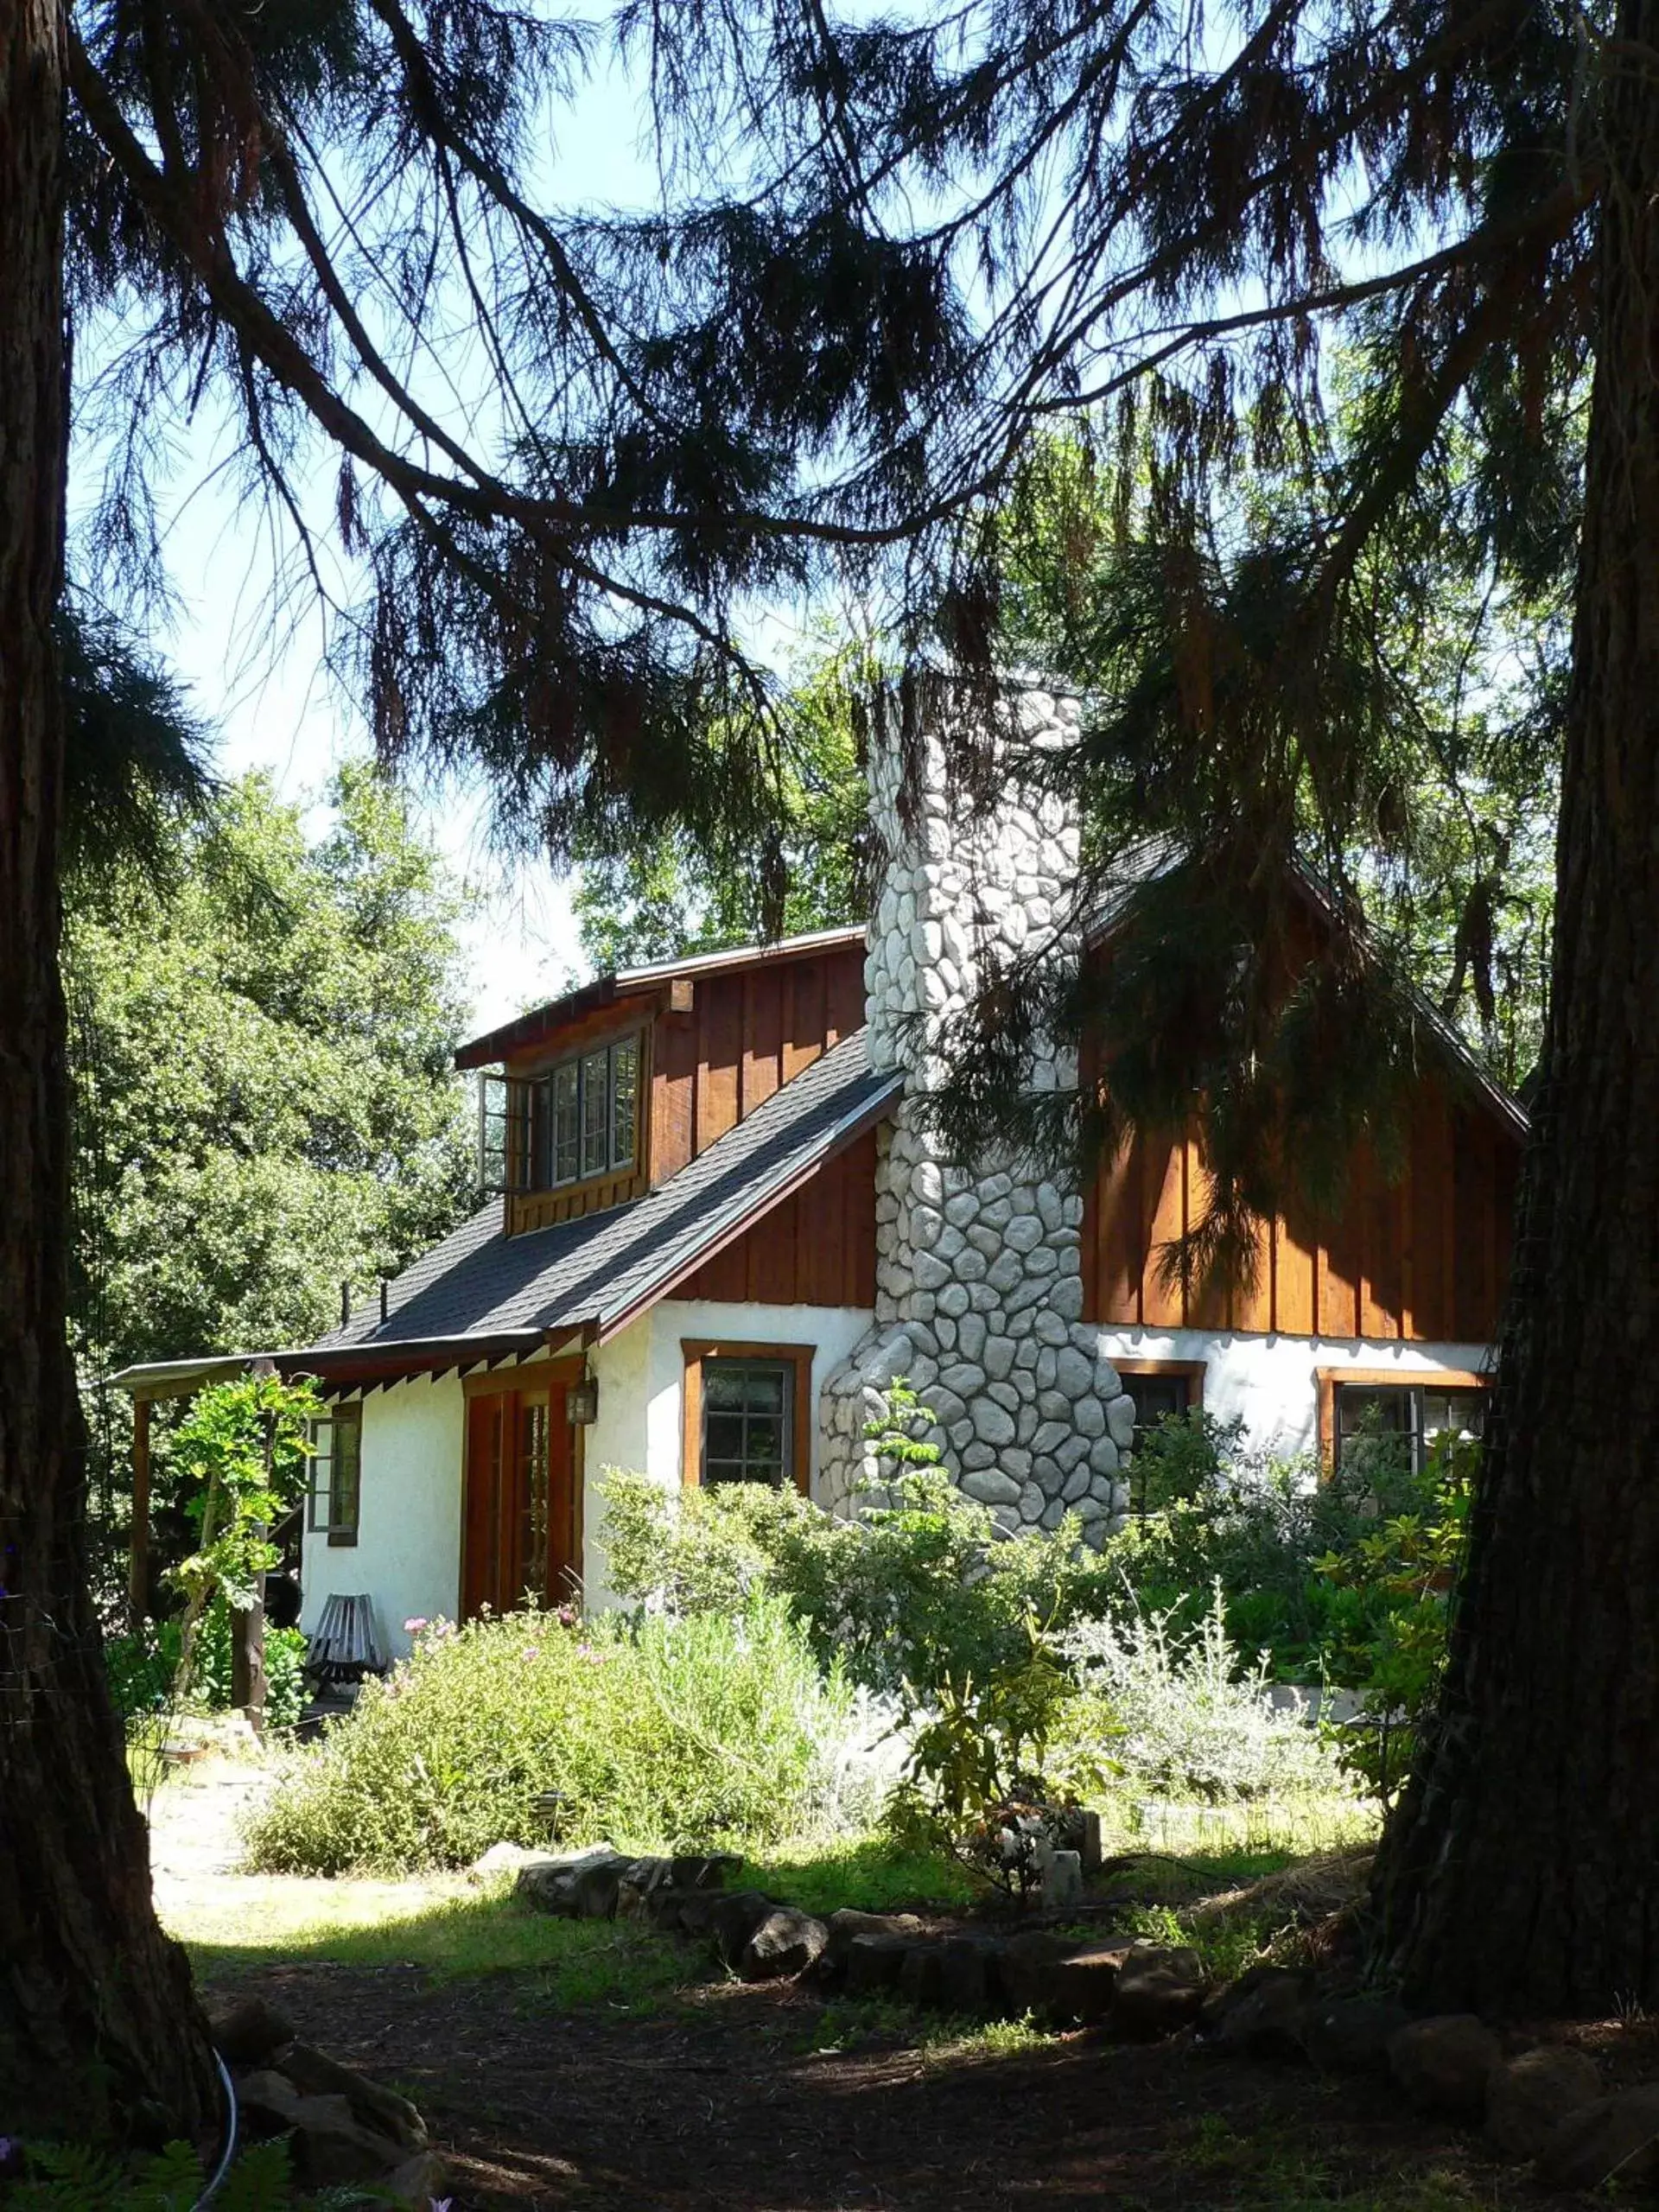 Property Building in Yosemite Rose Bed and Breakfast